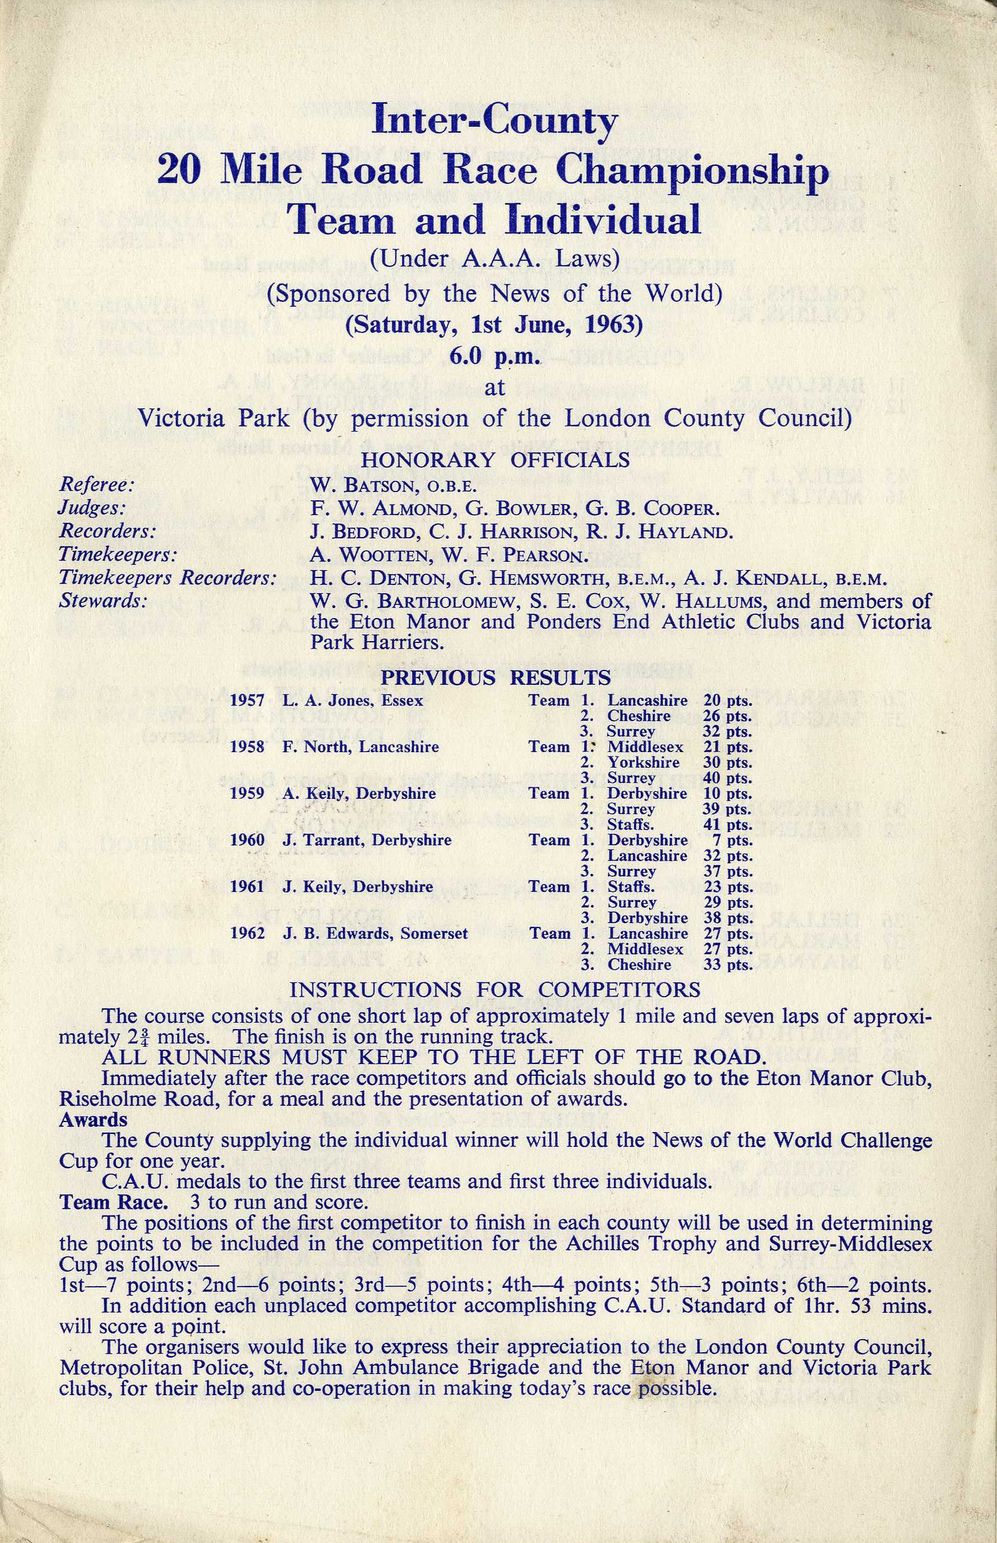 Inter-County 20 mile Road Race Programme 1963